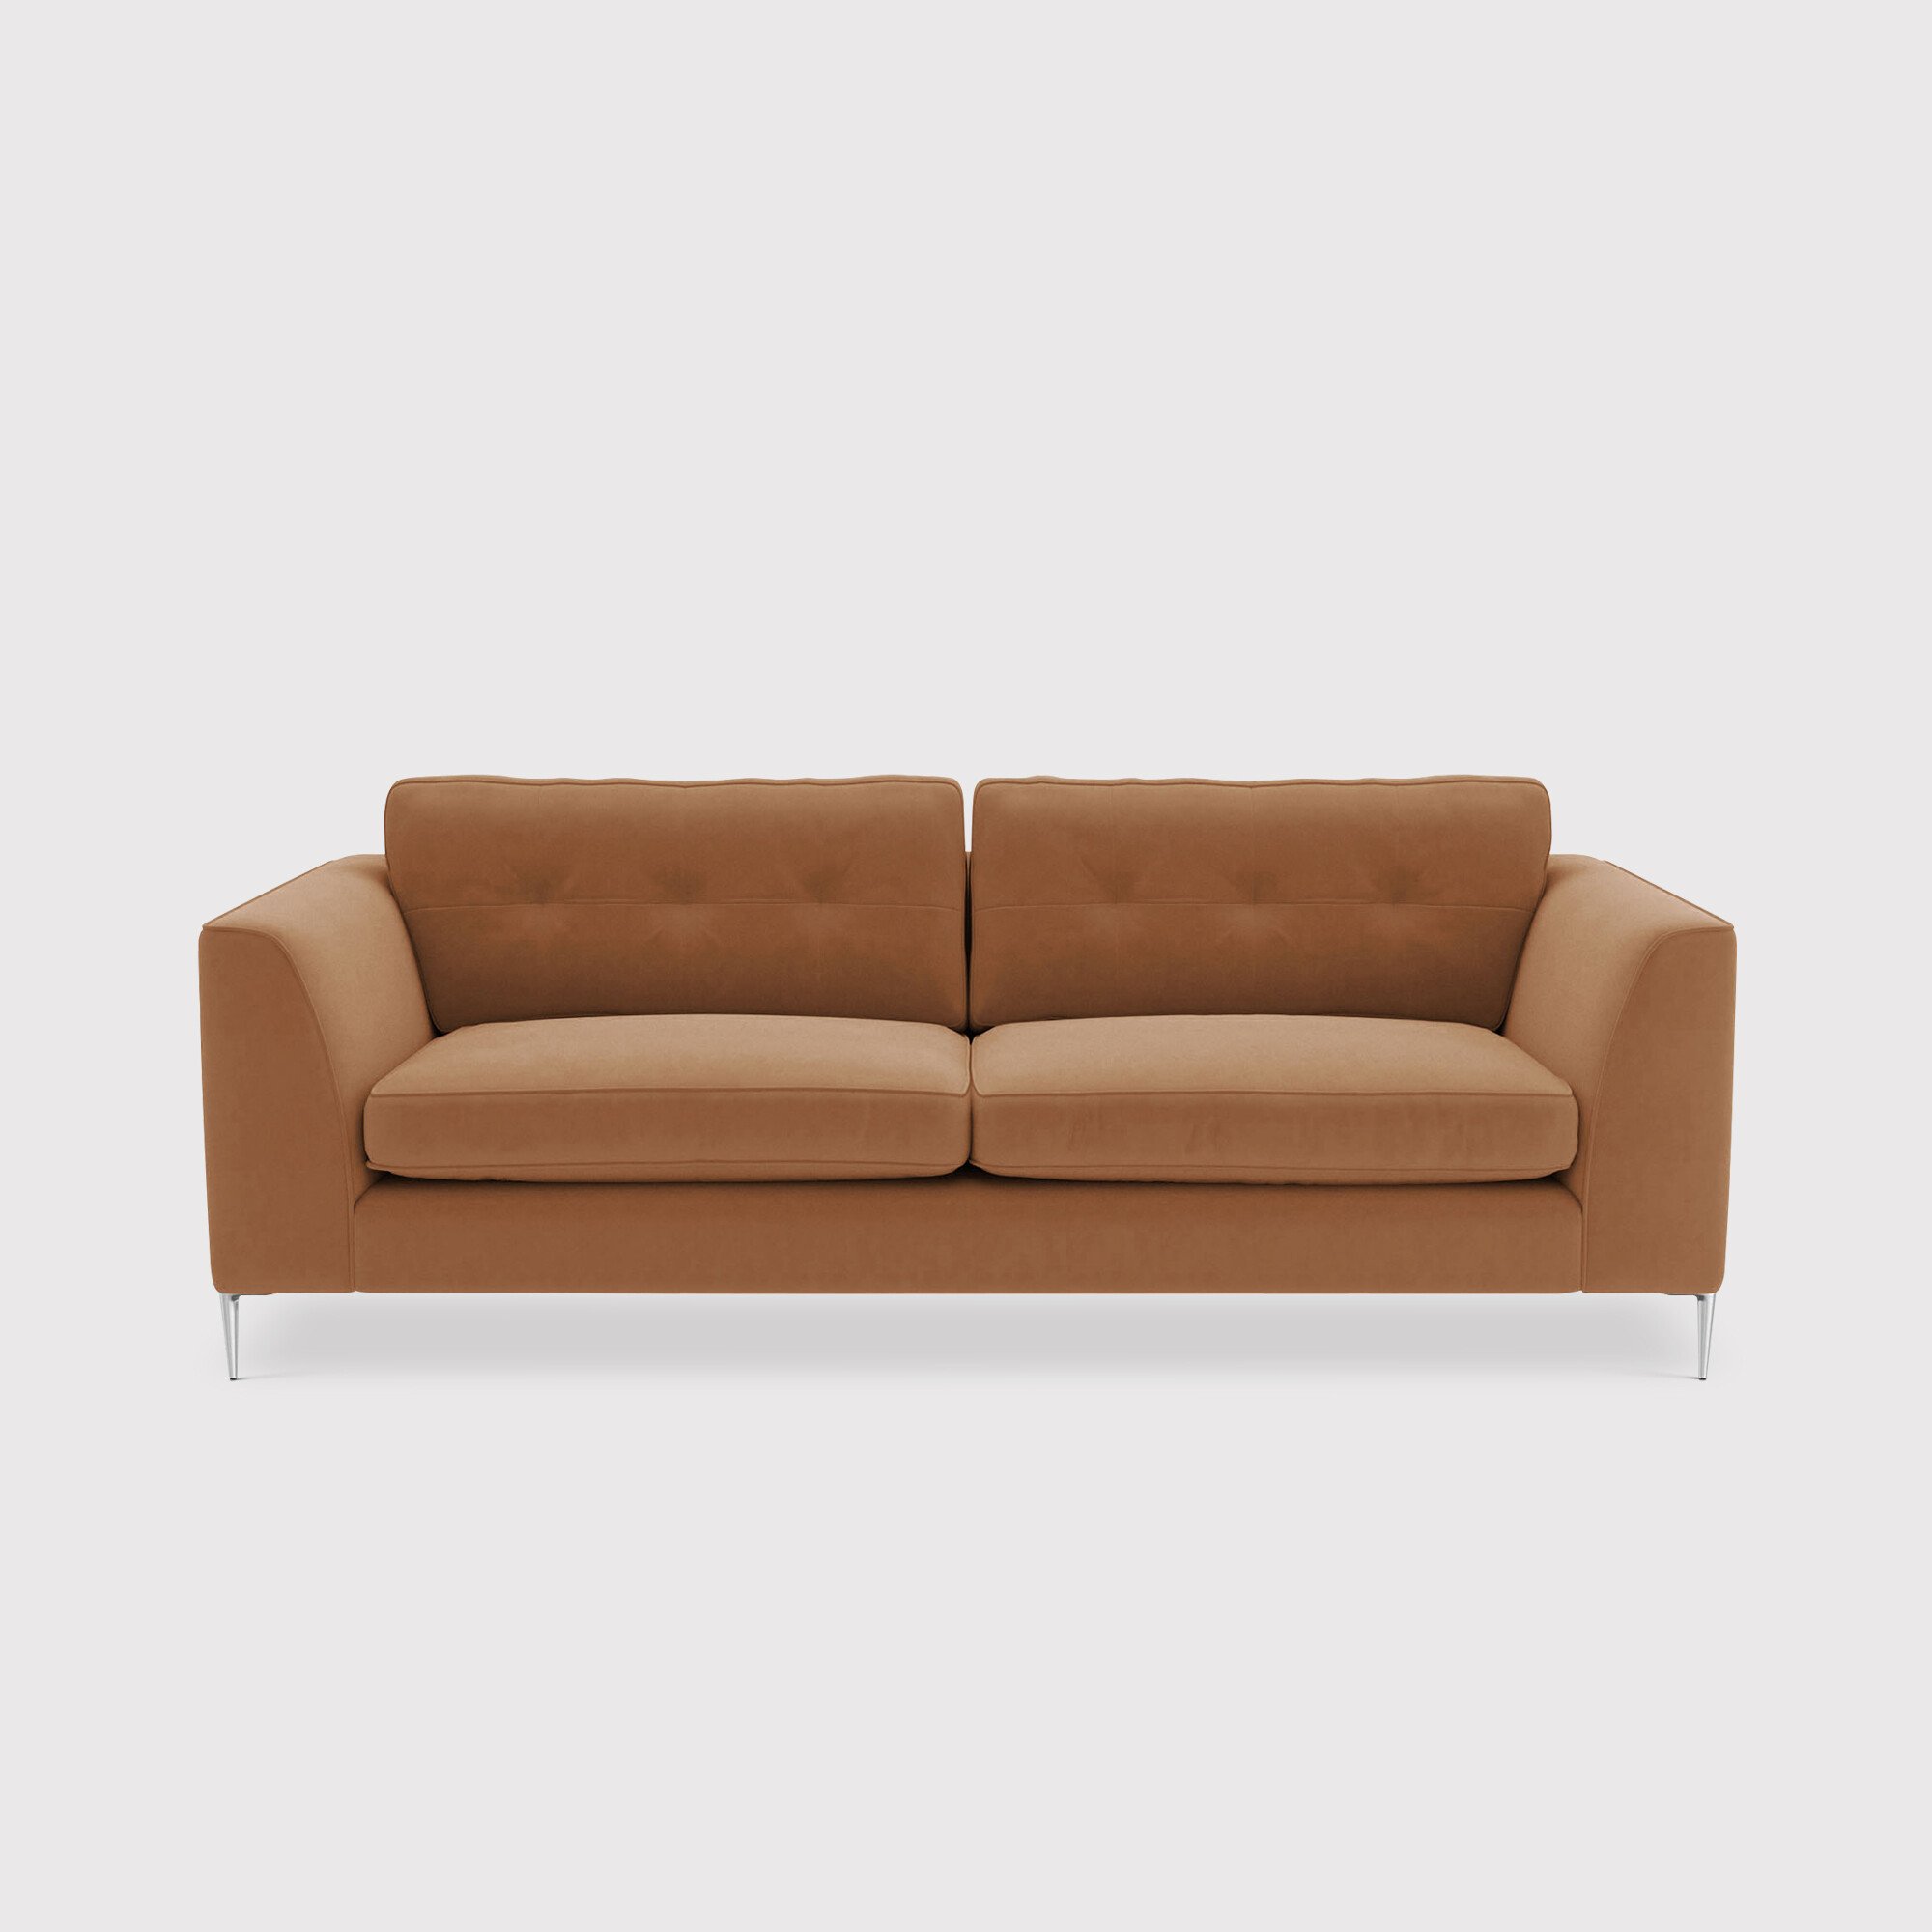 Conza Extra Large Sofa, Brown Fabric | Barker & Stonehouse